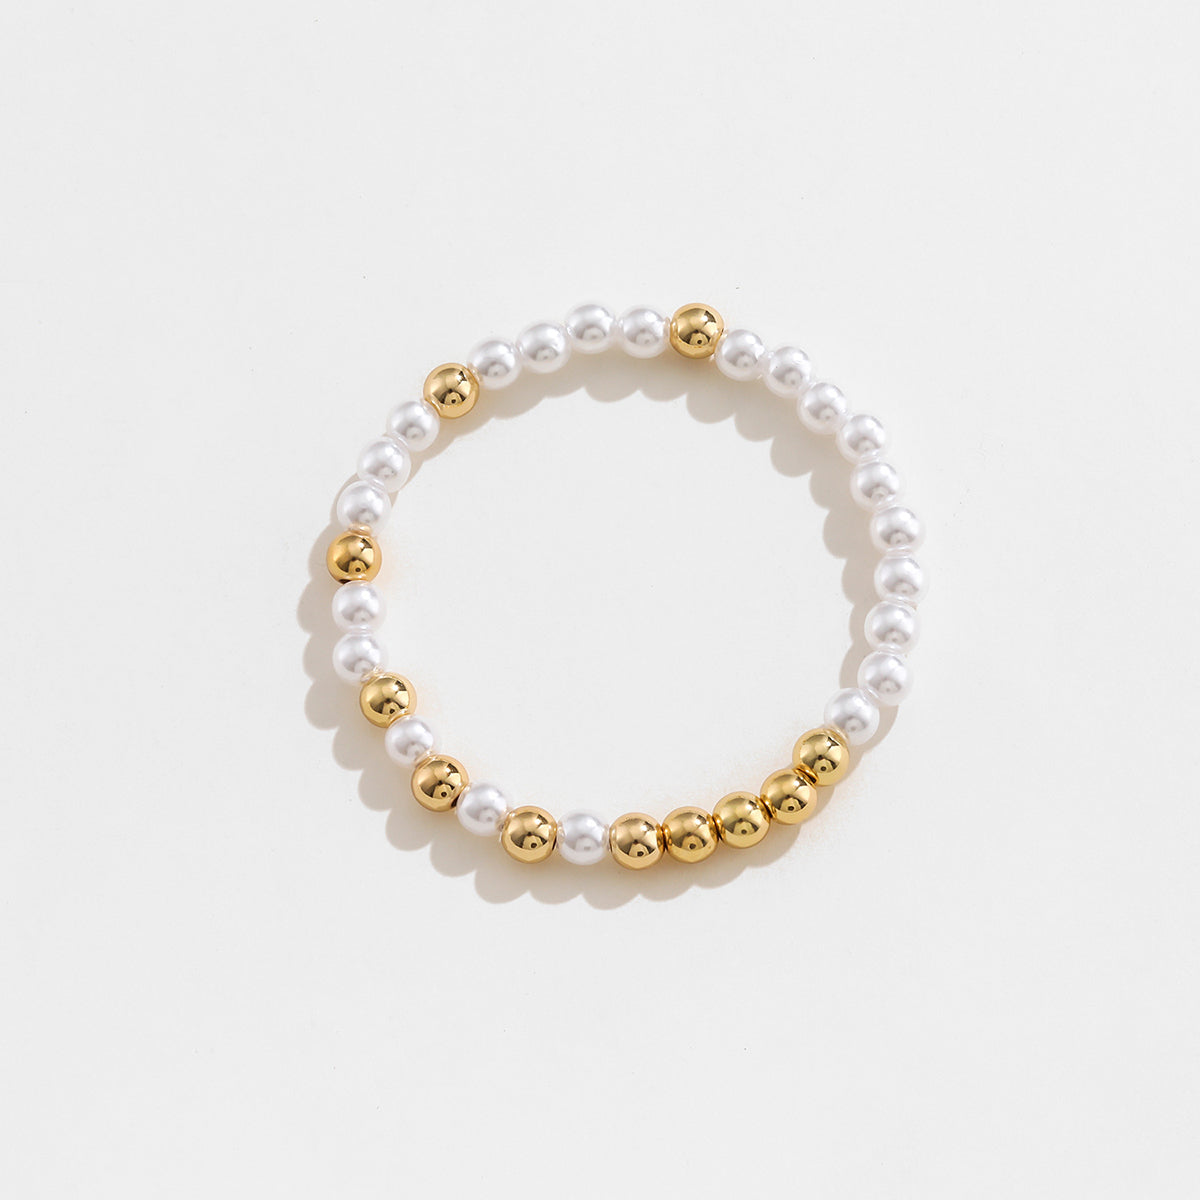 Fashionable Gold-Plated Pearl Copper Bracelet